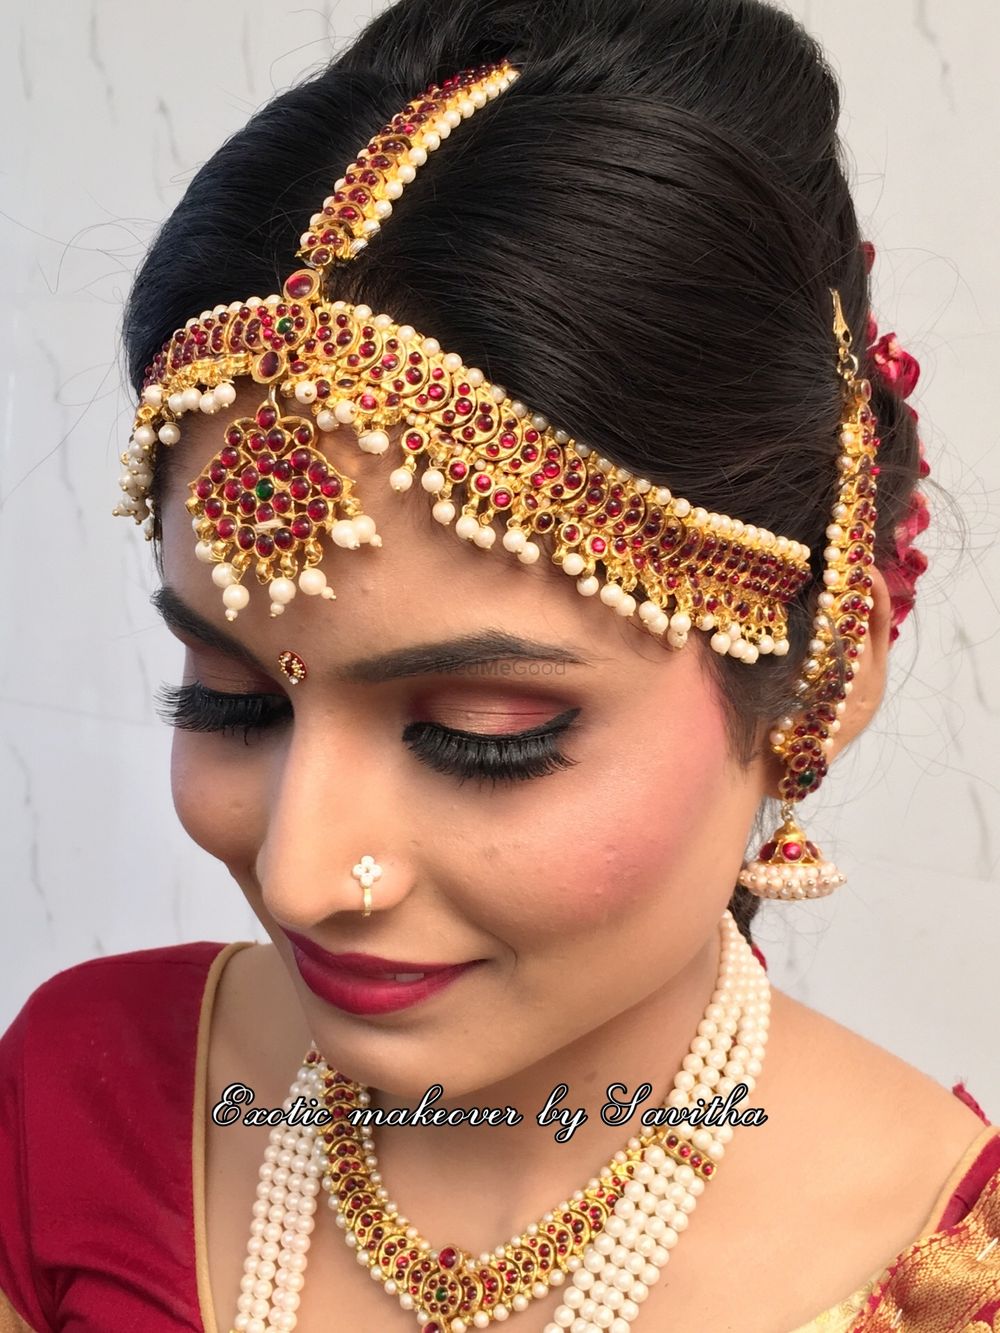 Photo From Exotic makeovers - By Exotic makeover by Savitha 